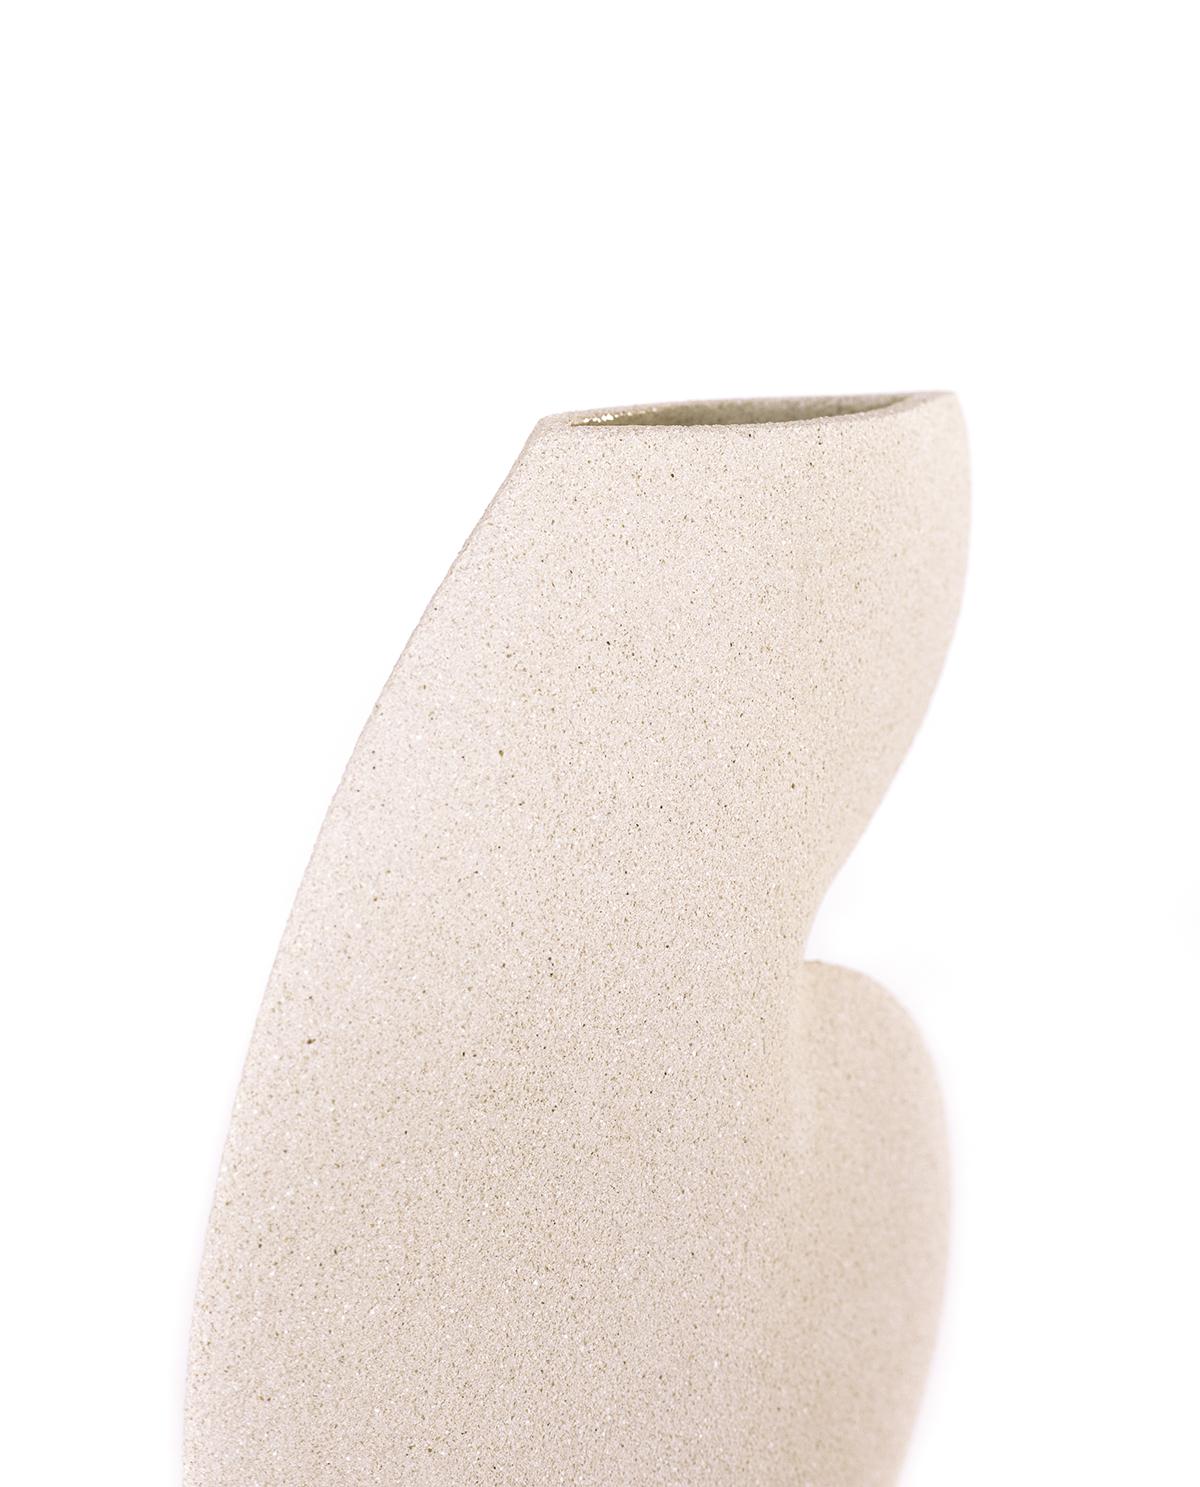 European 21st Century Ellipse N°4 Vase in White Ceramic, Hand-Crafted in France For Sale